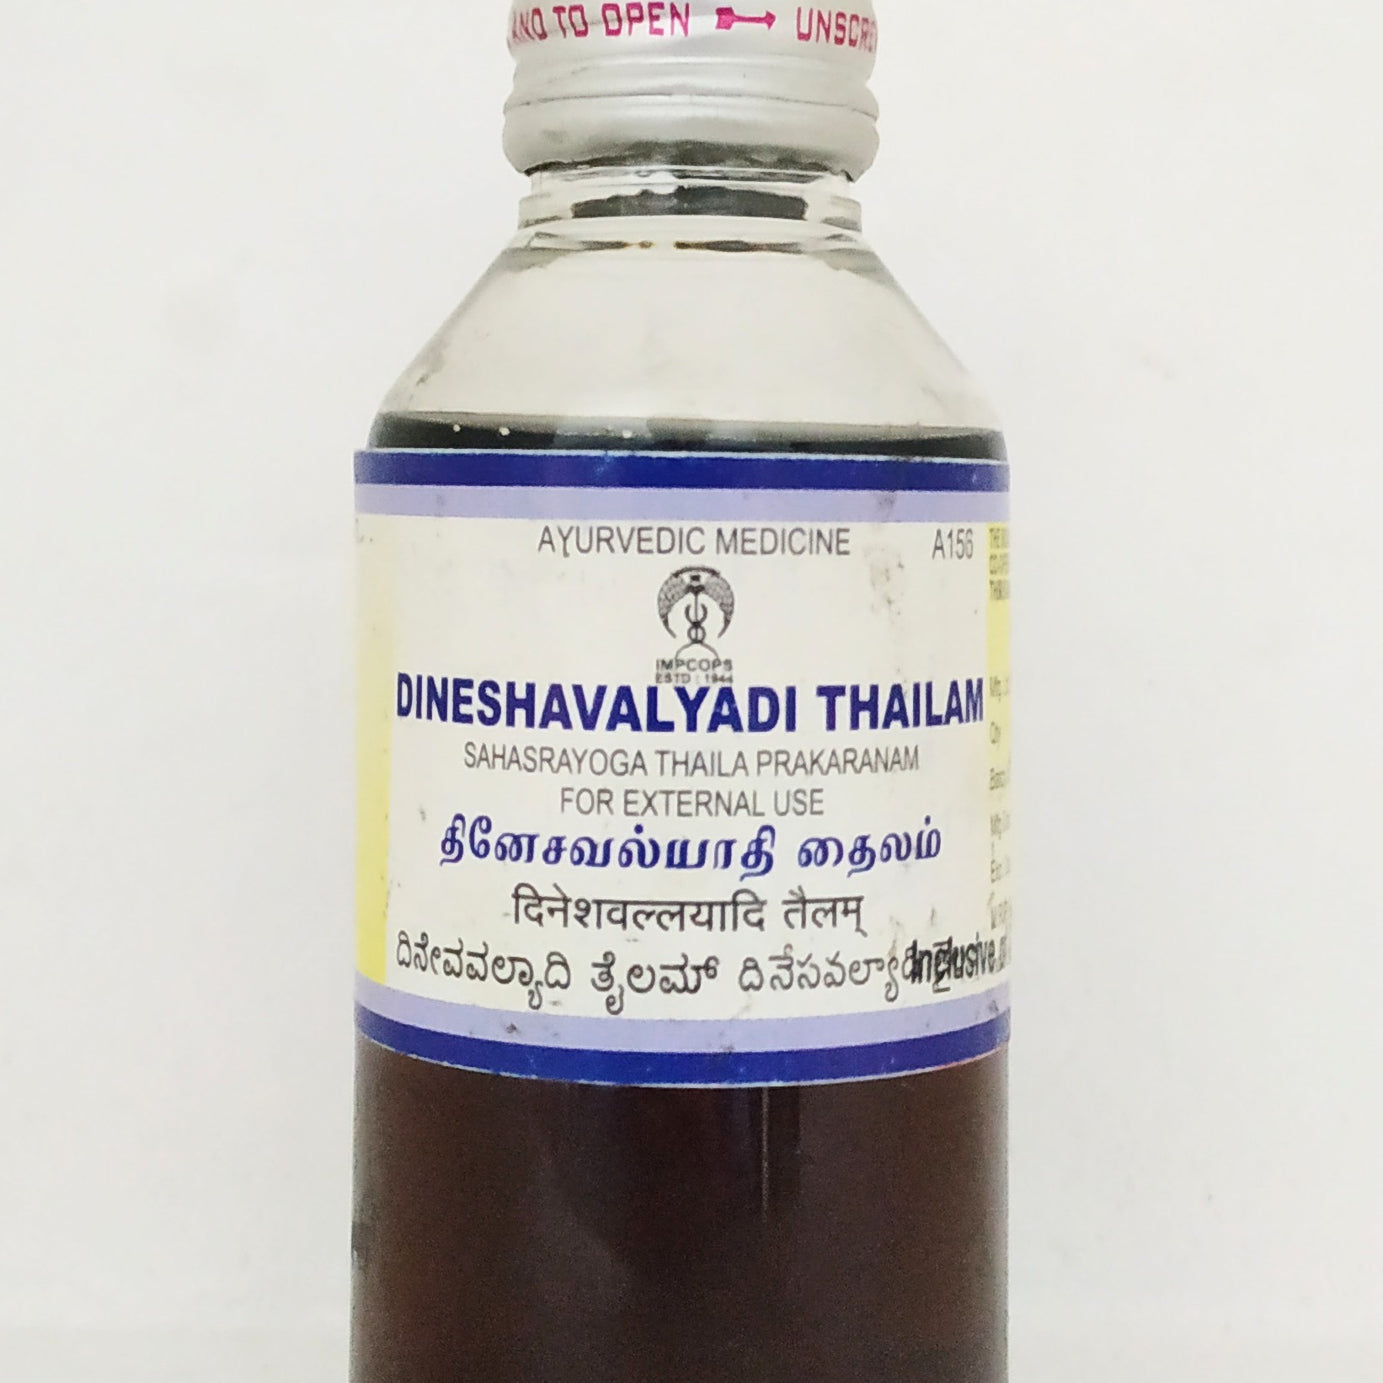 Shop Impcops Dineshvalyadi Thailam 100ml at price 122.00 from Impcops Online - Ayush Care